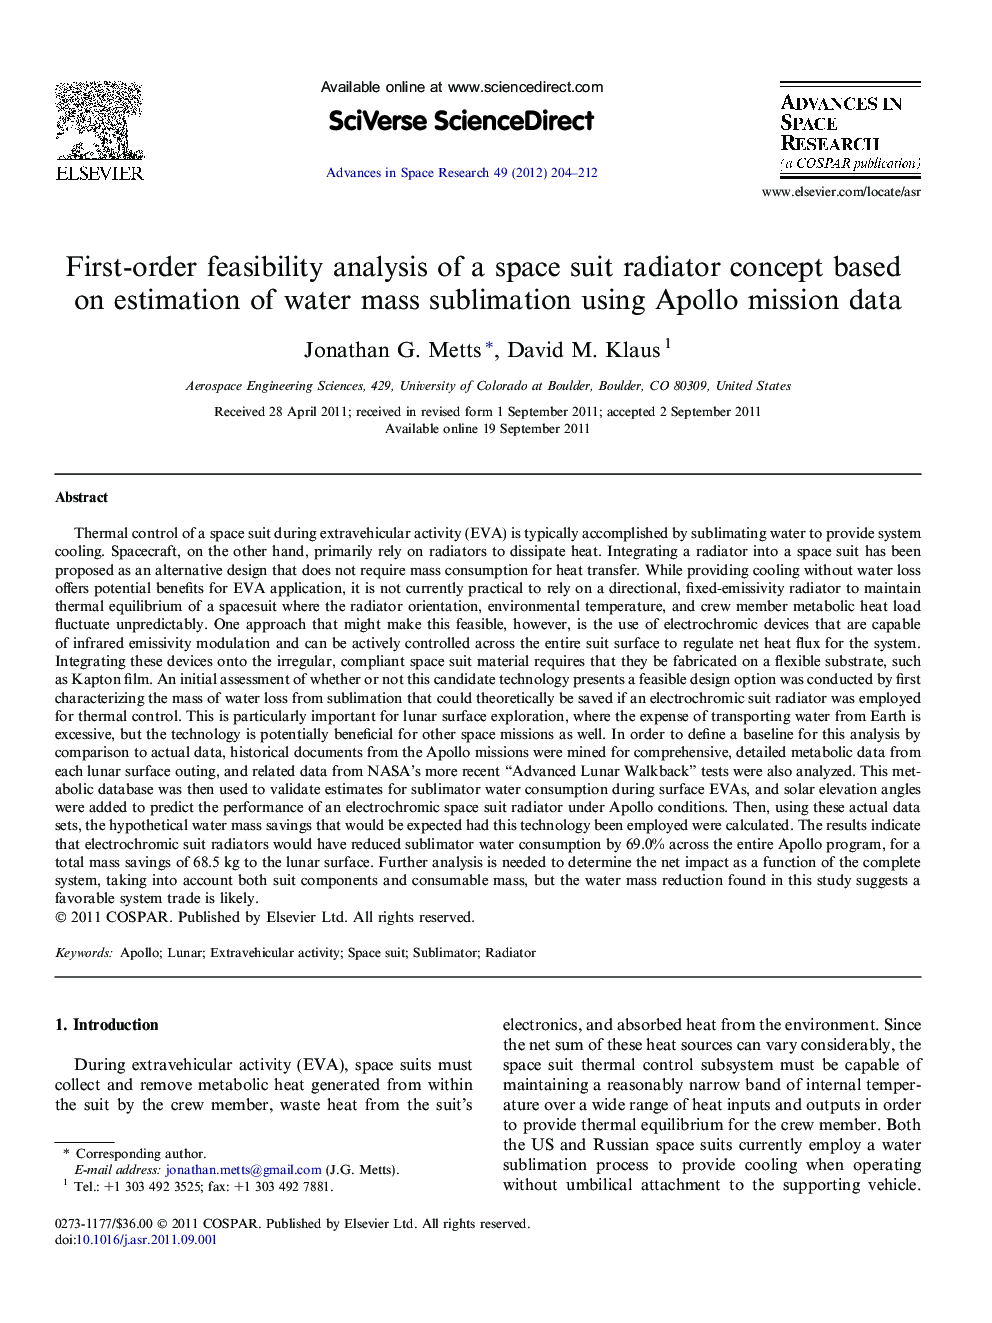 First-order feasibility analysis of a space suit radiator concept based on estimation of water mass sublimation using Apollo mission data